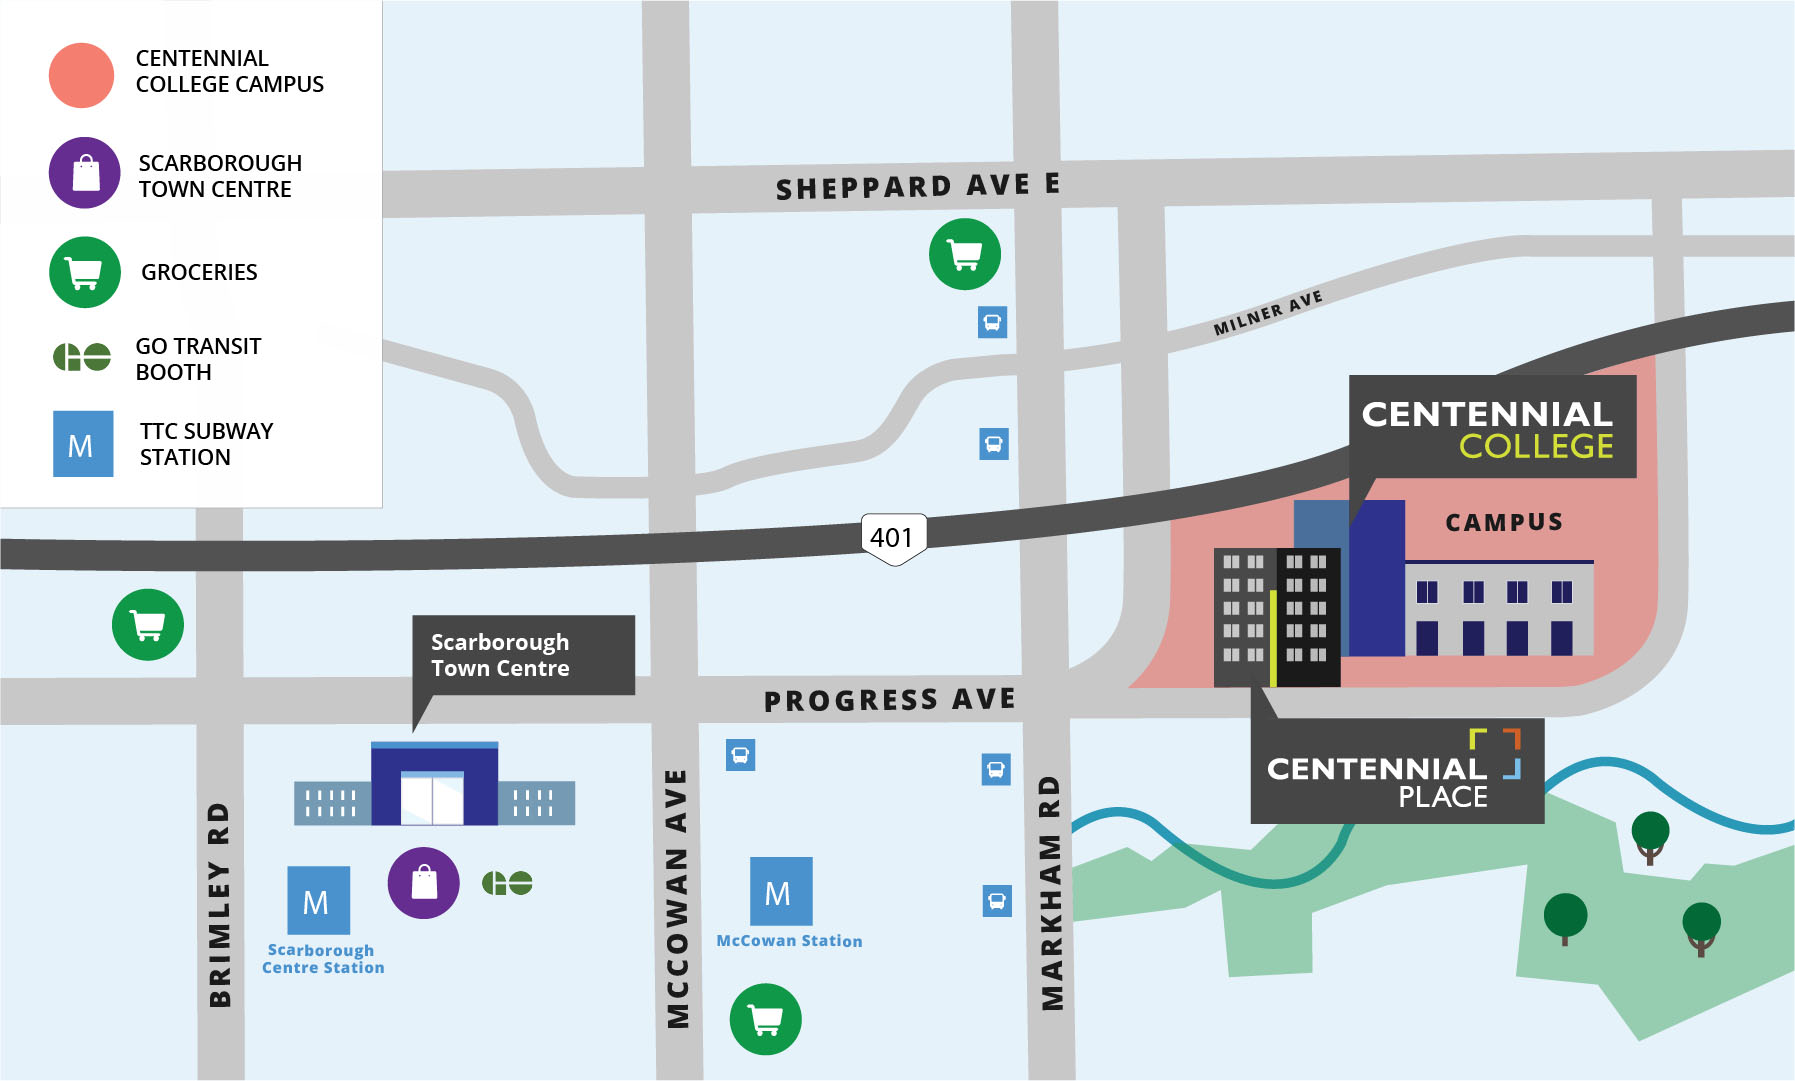 Centennial Place location map. Student living on Centennial College campus in Scarborough.